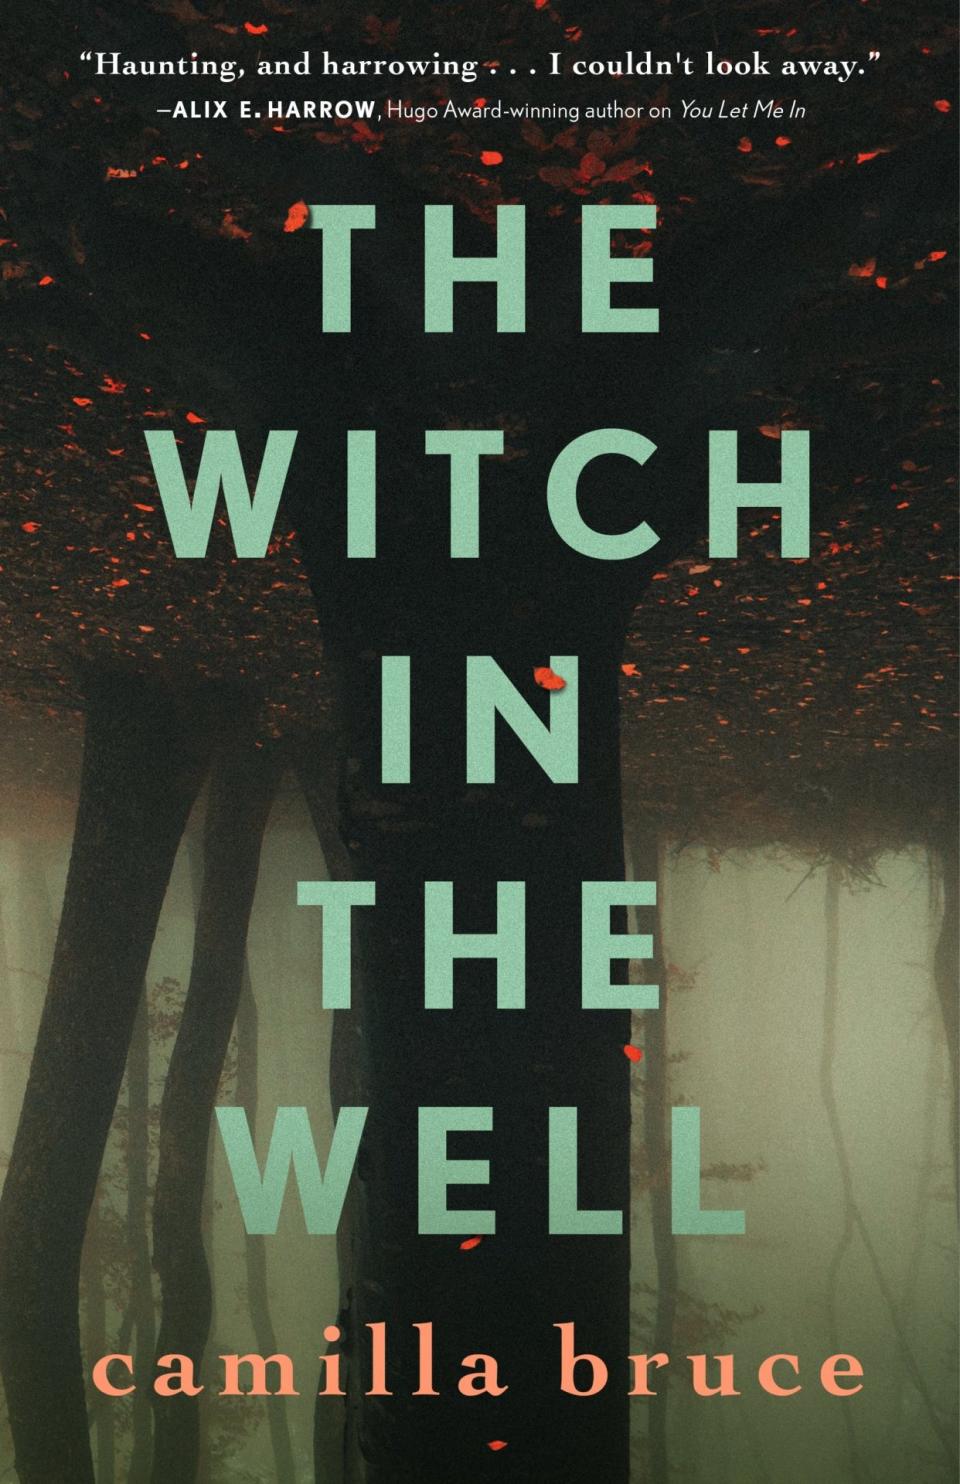 the cover for The Witch in the Well shows a dark forest